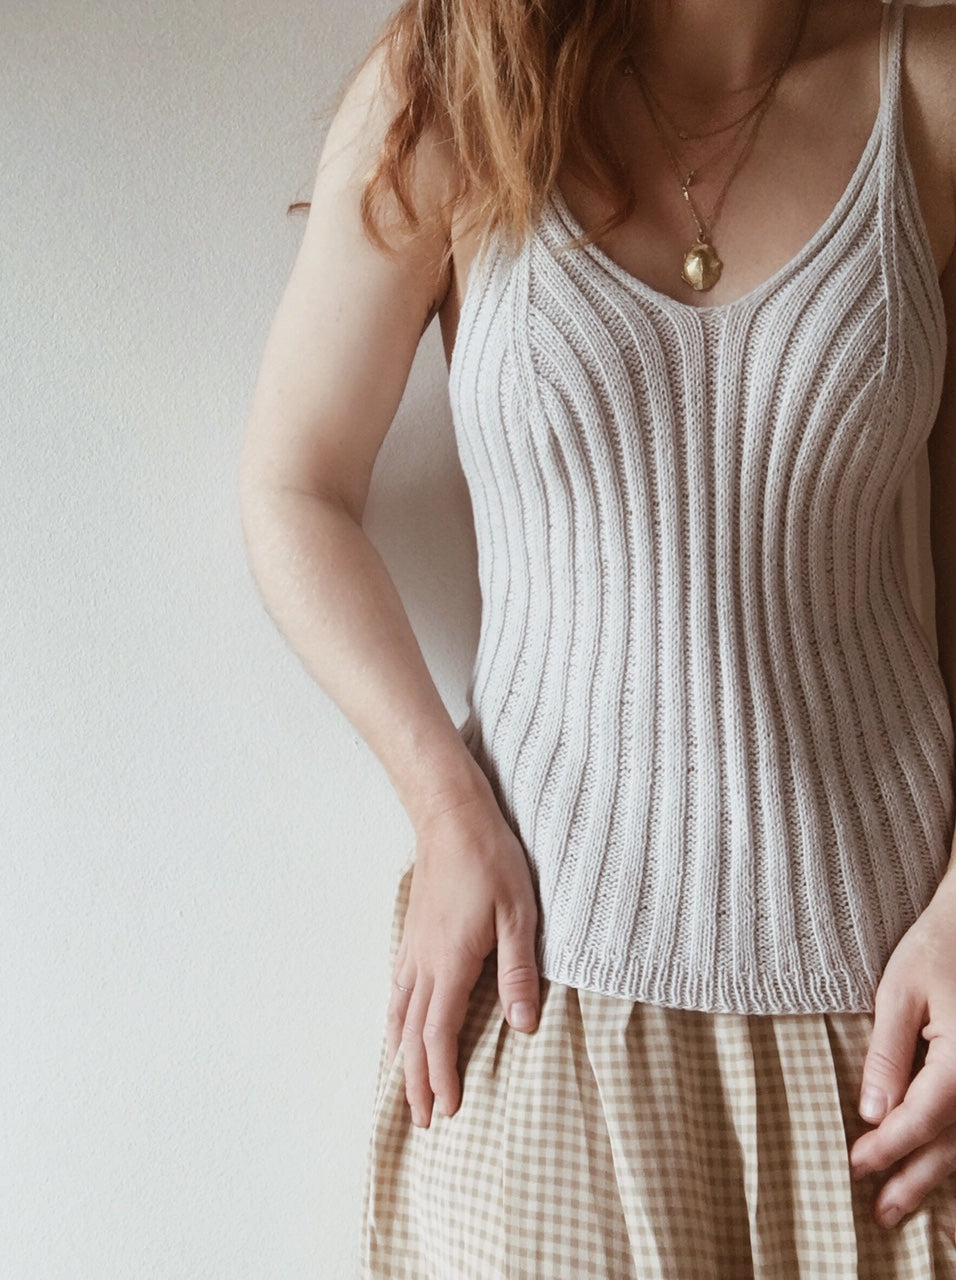 Camisole No. 2 - Knitting Pattern in English – • MY FAVOURITE THINGS •  KNITWEAR